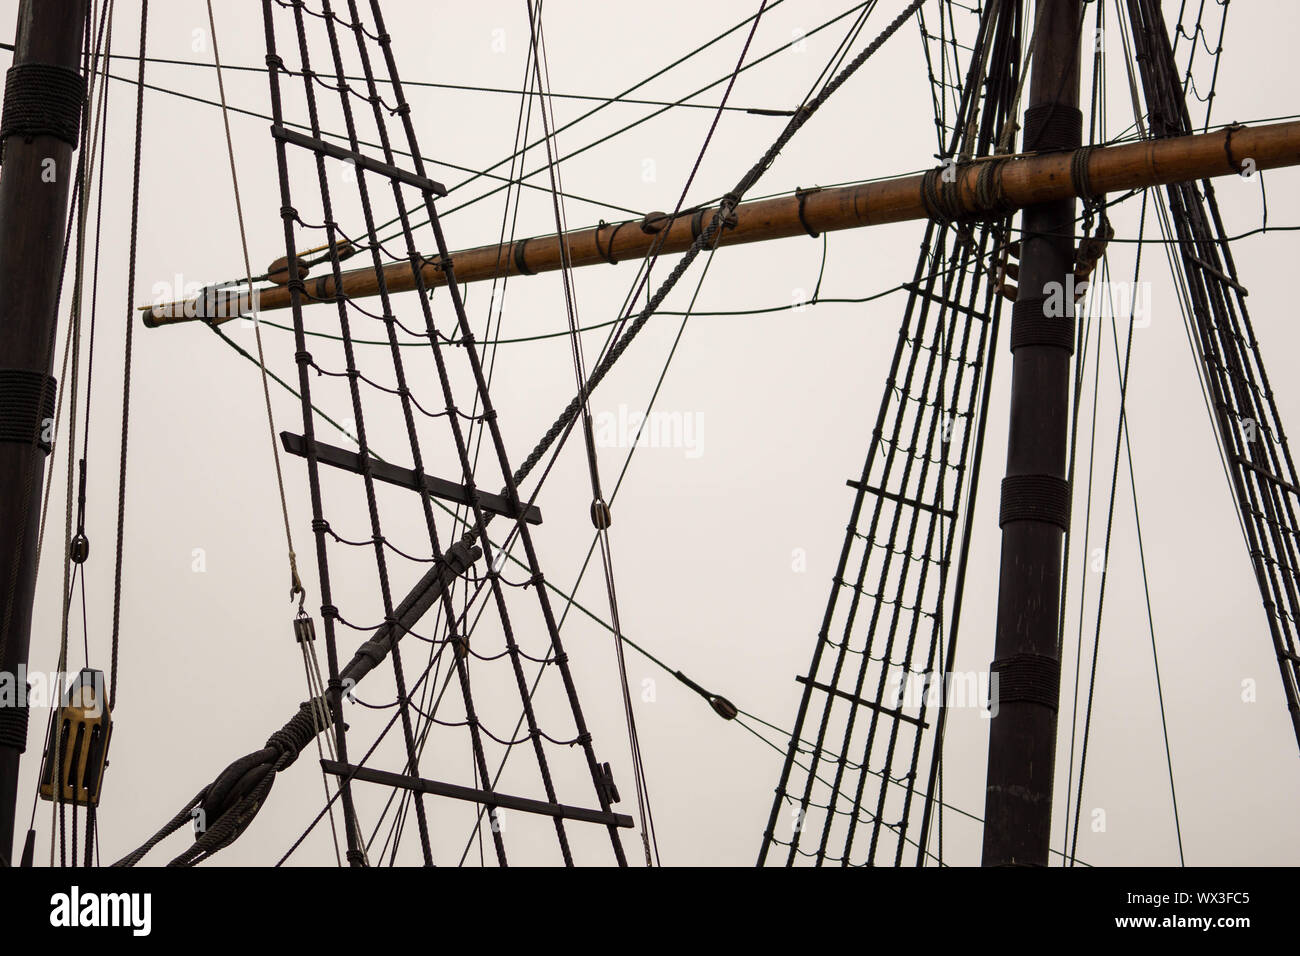 rigging and mast of an old sailing ship Stock Photo